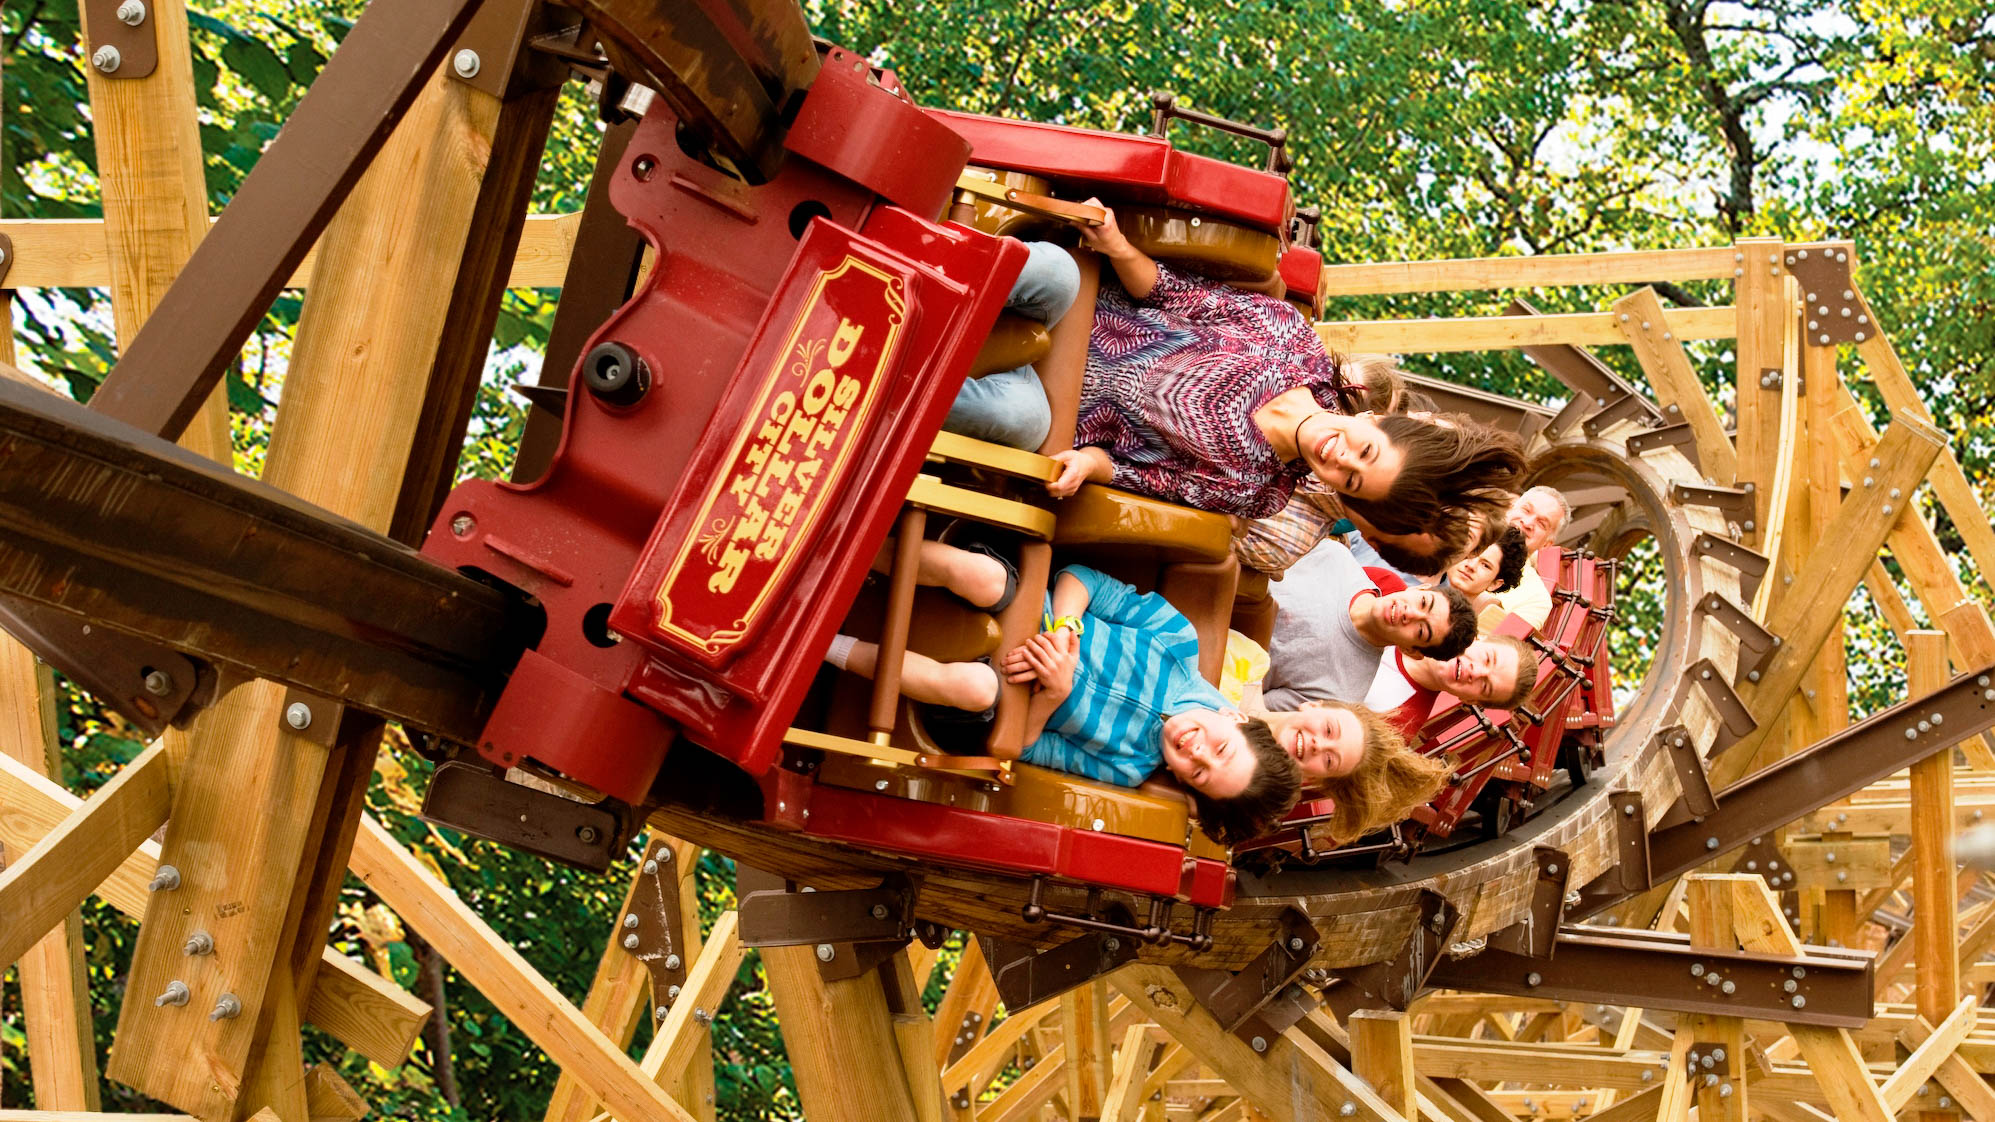 130319 SDC Outlaw Run barrel roll - Silver Dollar City one of Top 5 Amusement Parks in USA